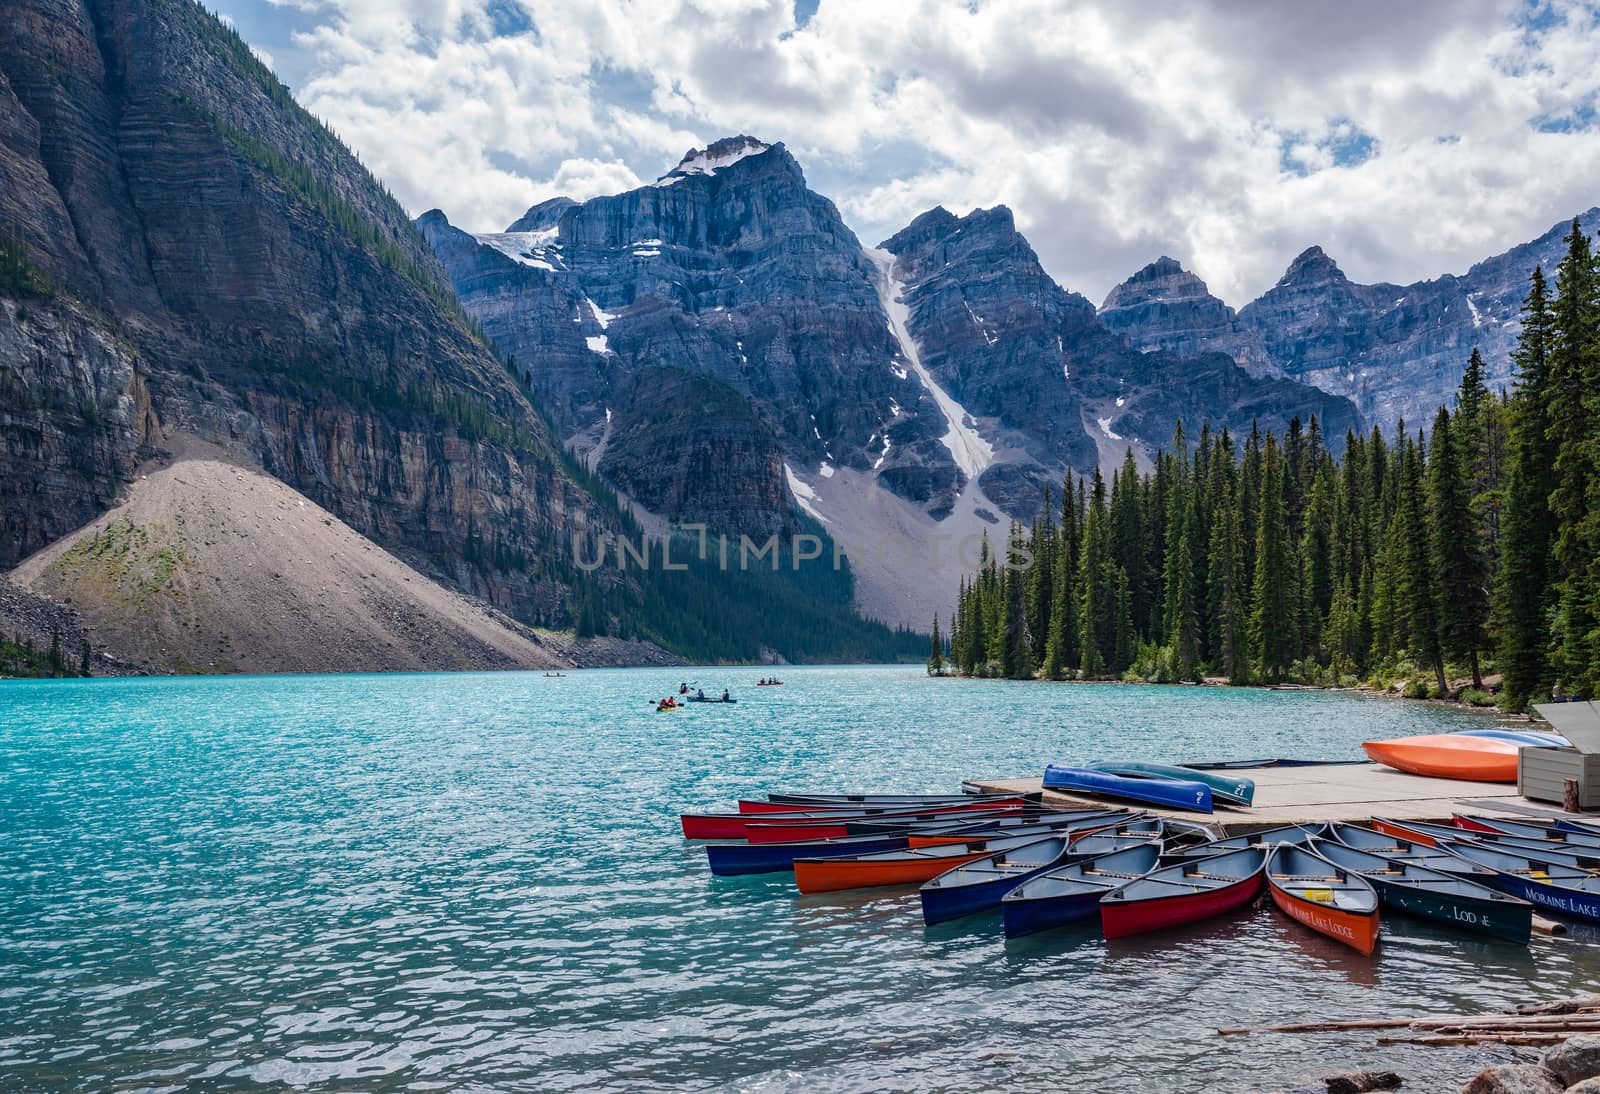 Boaters on Moraine Lake by jfbenning